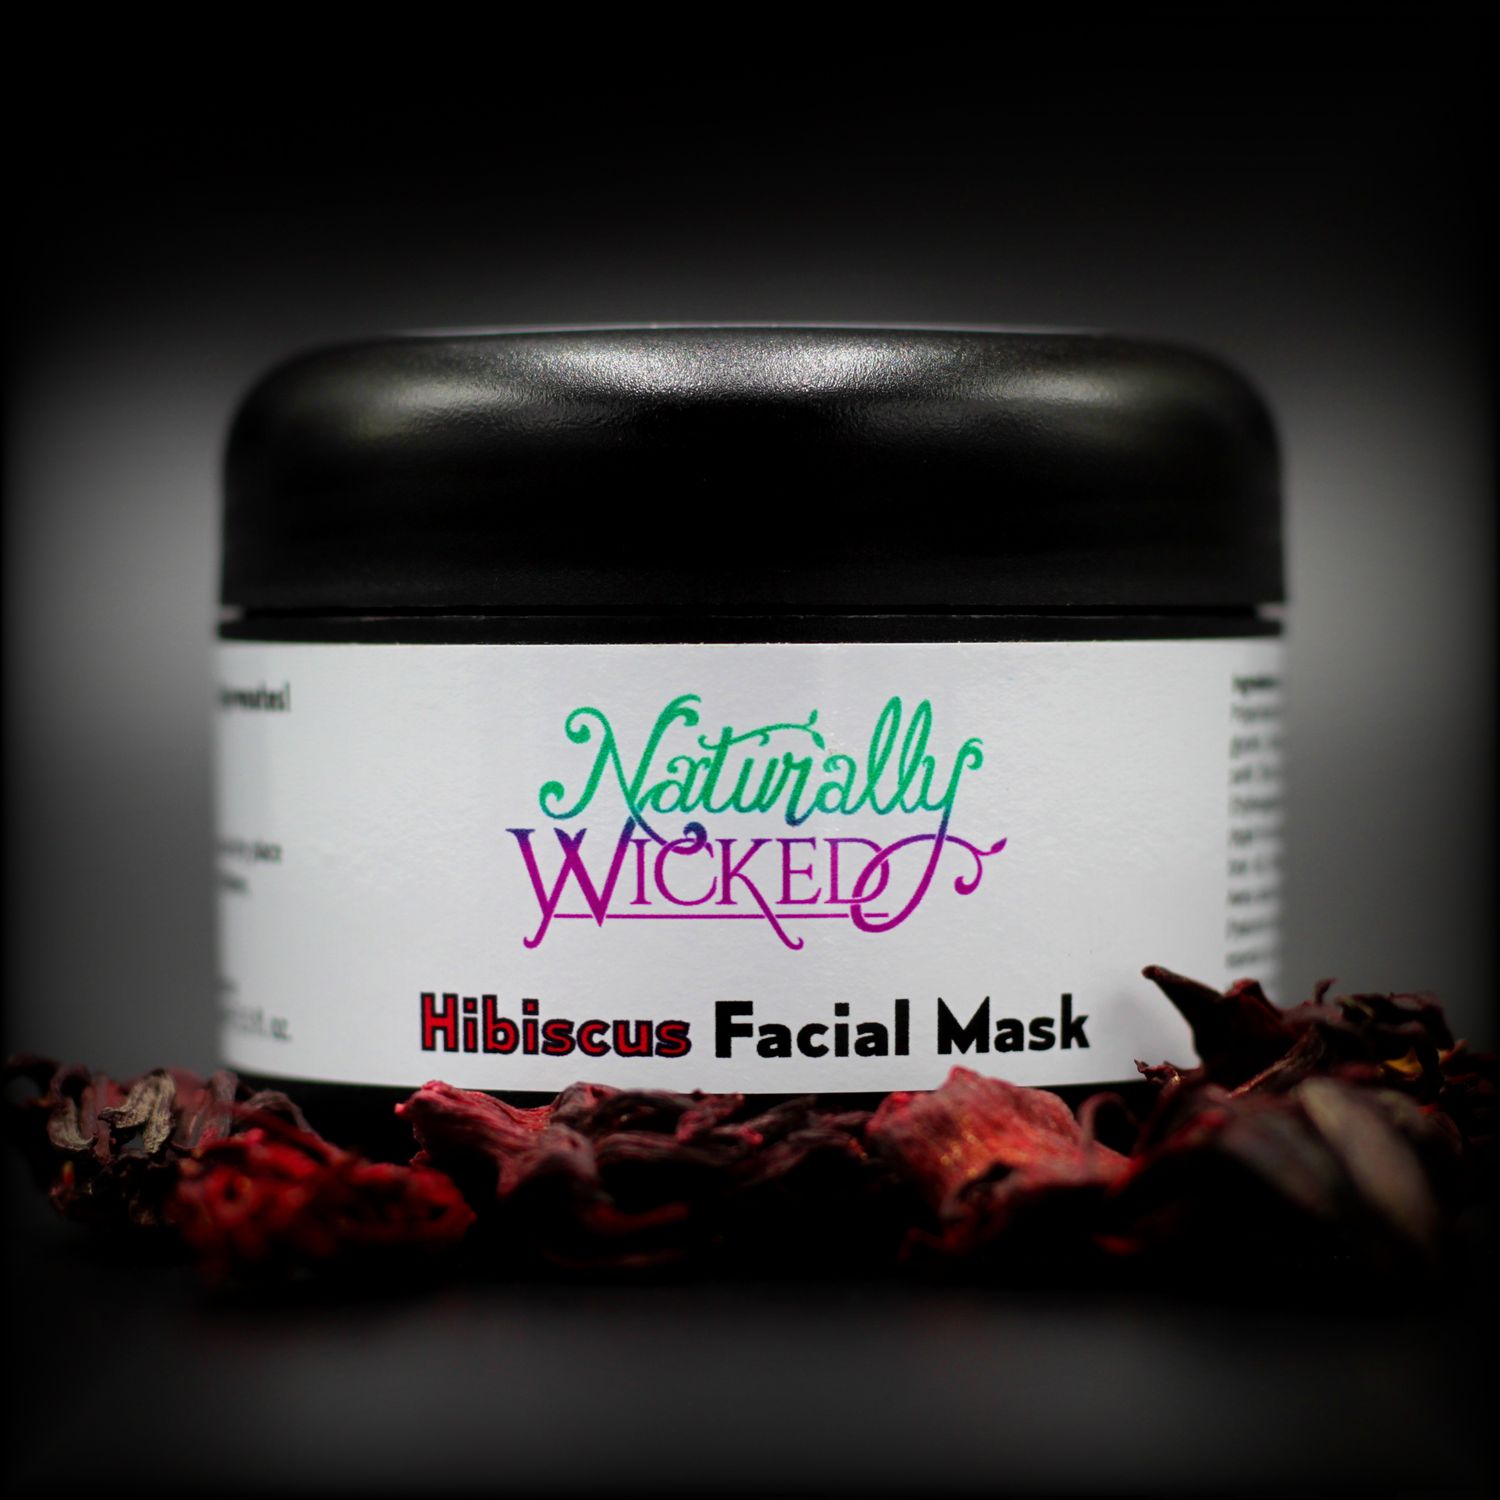 Naturally Wicked Hibiscus Facial Mask Surrounded By Bright Red Firming Hibiscus Flowers